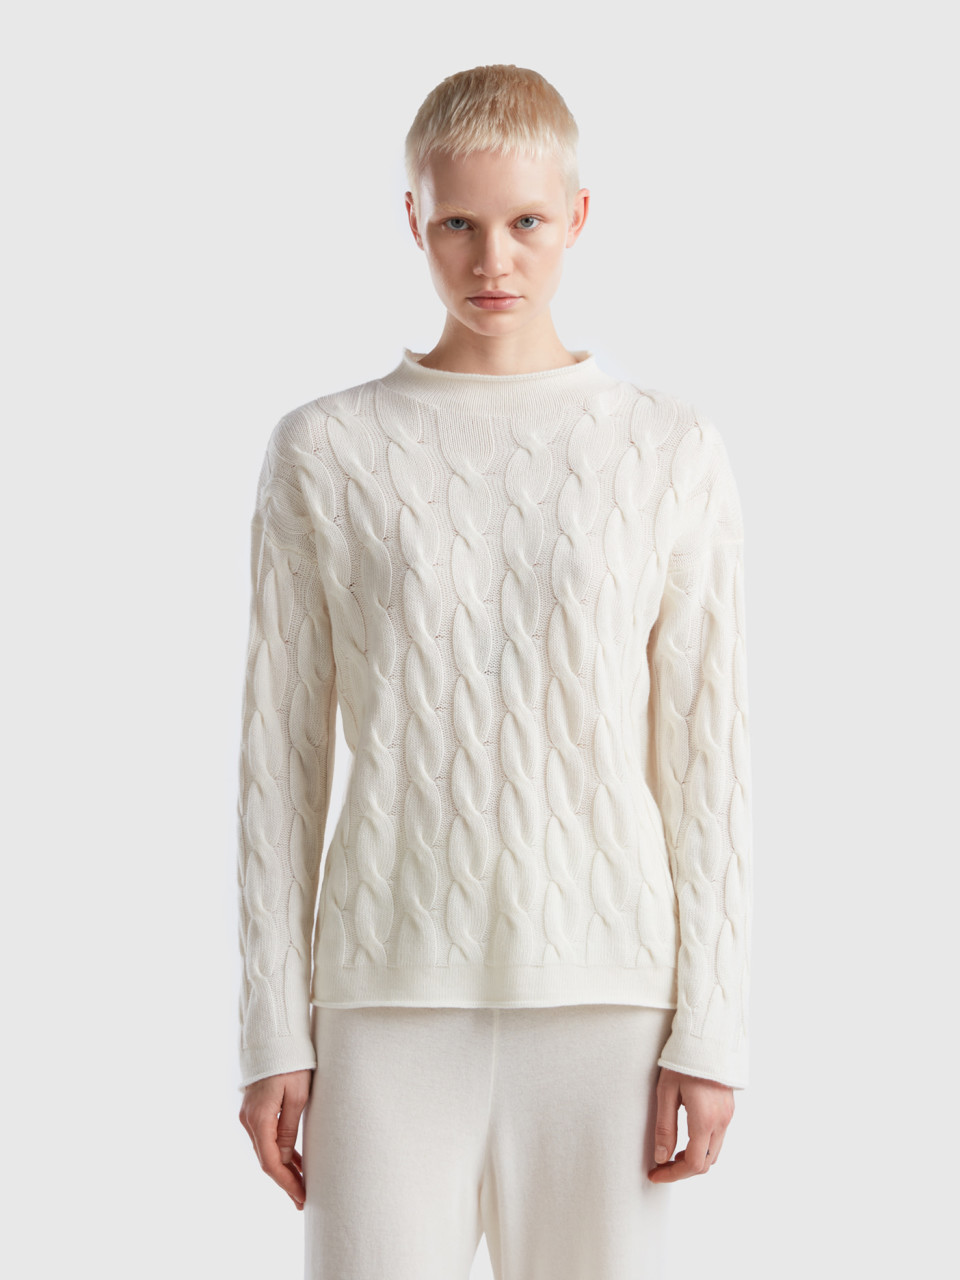 Benetton, Cable Knit Sweater, Creamy White, Women